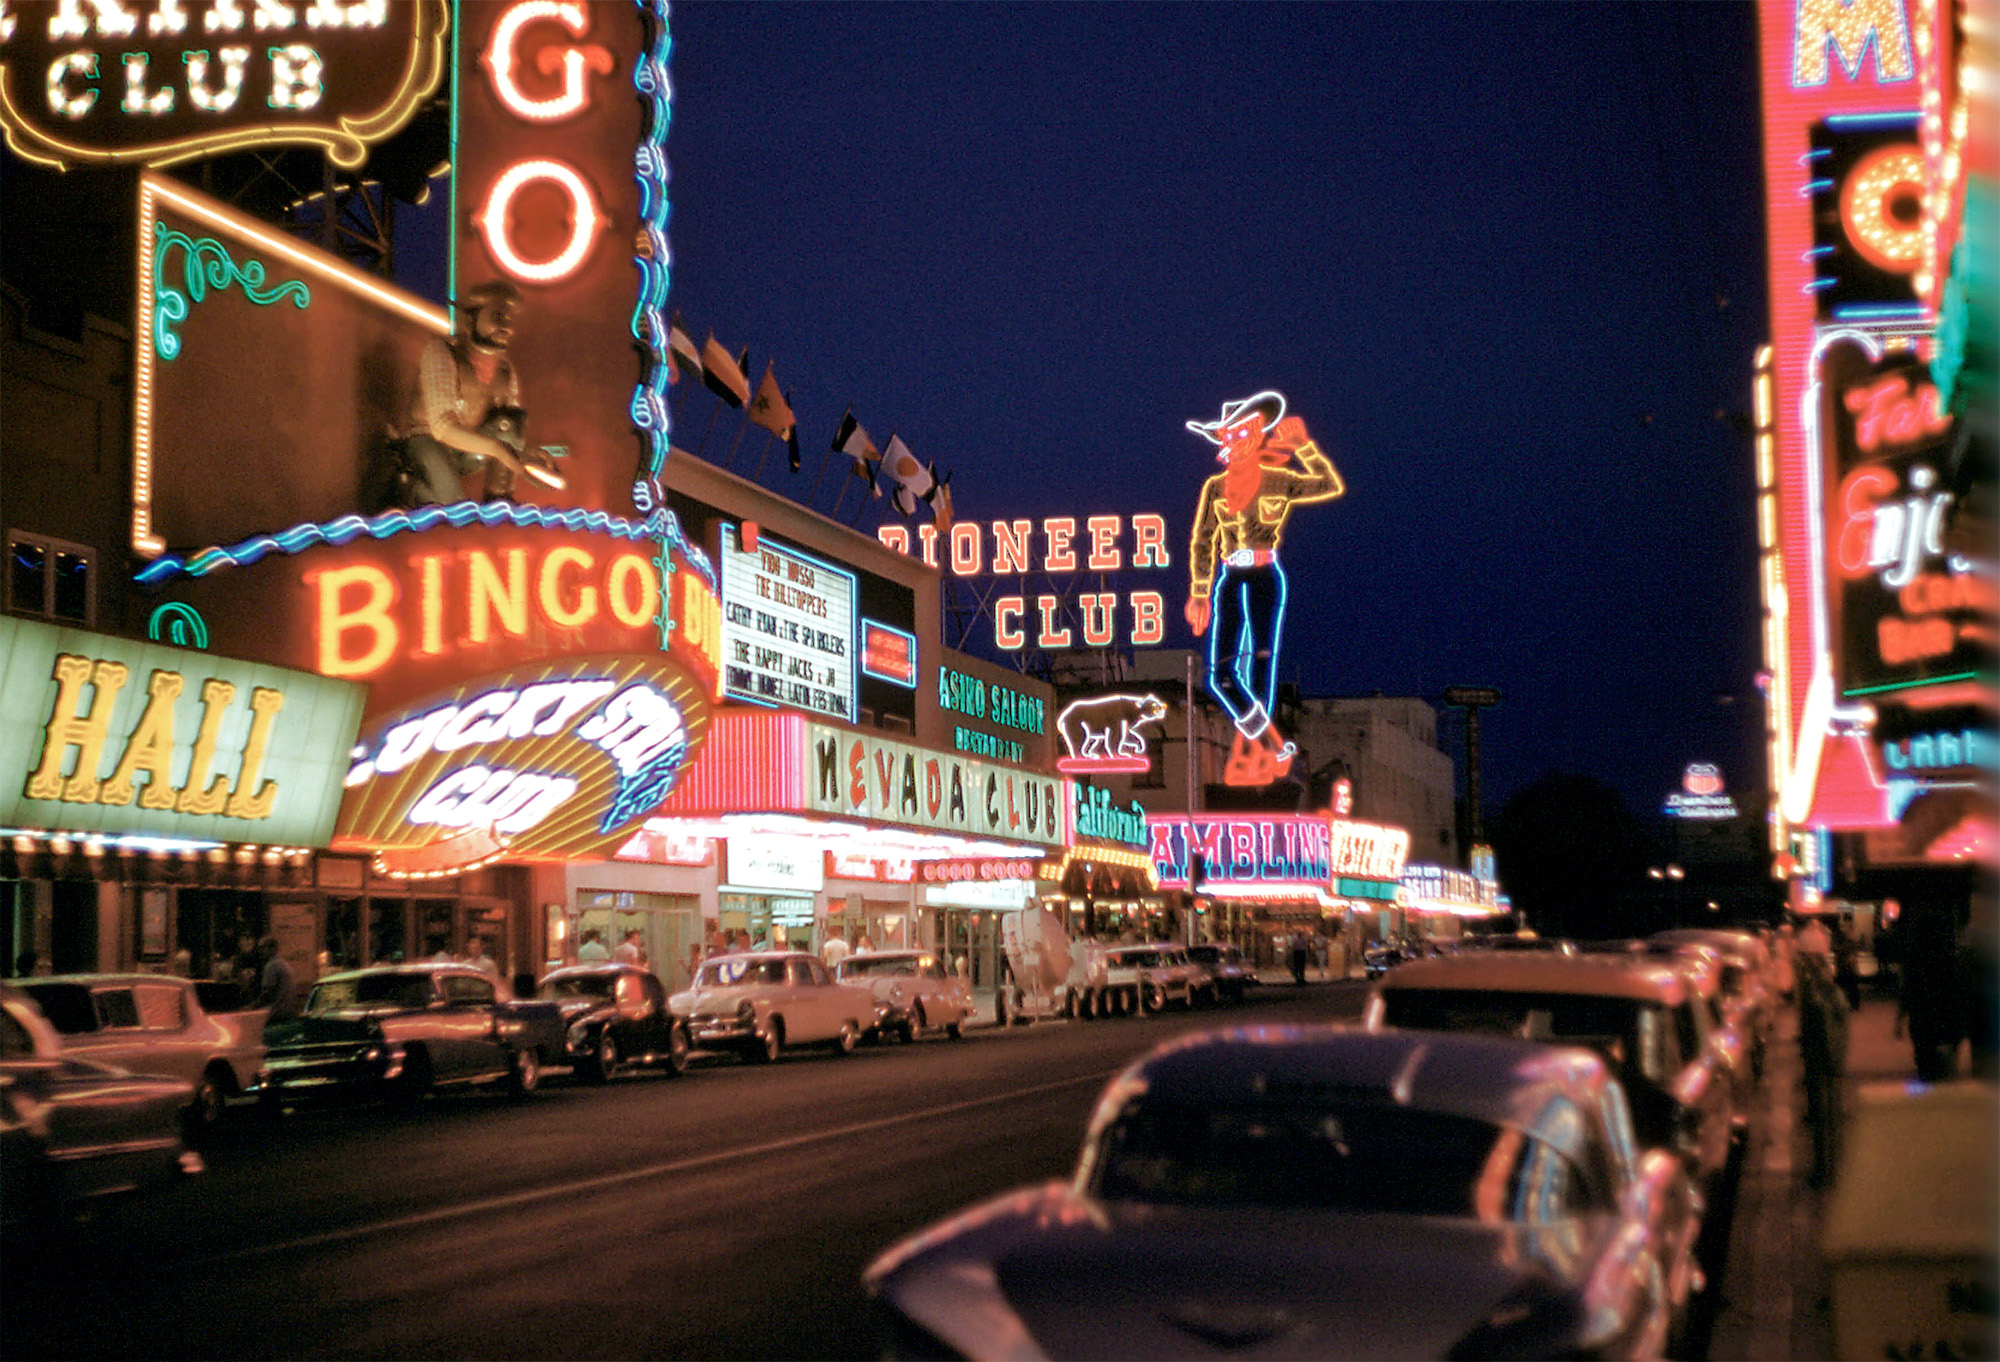 Classic Las Vegas -- Fremont Street. 35mm Kodachrome film taken by my father-in-law, Woodrow Humphries. I'm guessing 1958 or so. The Westerner was open from 1950 to 1962. The Mint and The Boulder Club (with its famous sign) are on the right edge. The marquee above the Nevada Club was a late-'50s addition. Any other thoughts are welcome. I just noticed the VW Beetle! View full size.